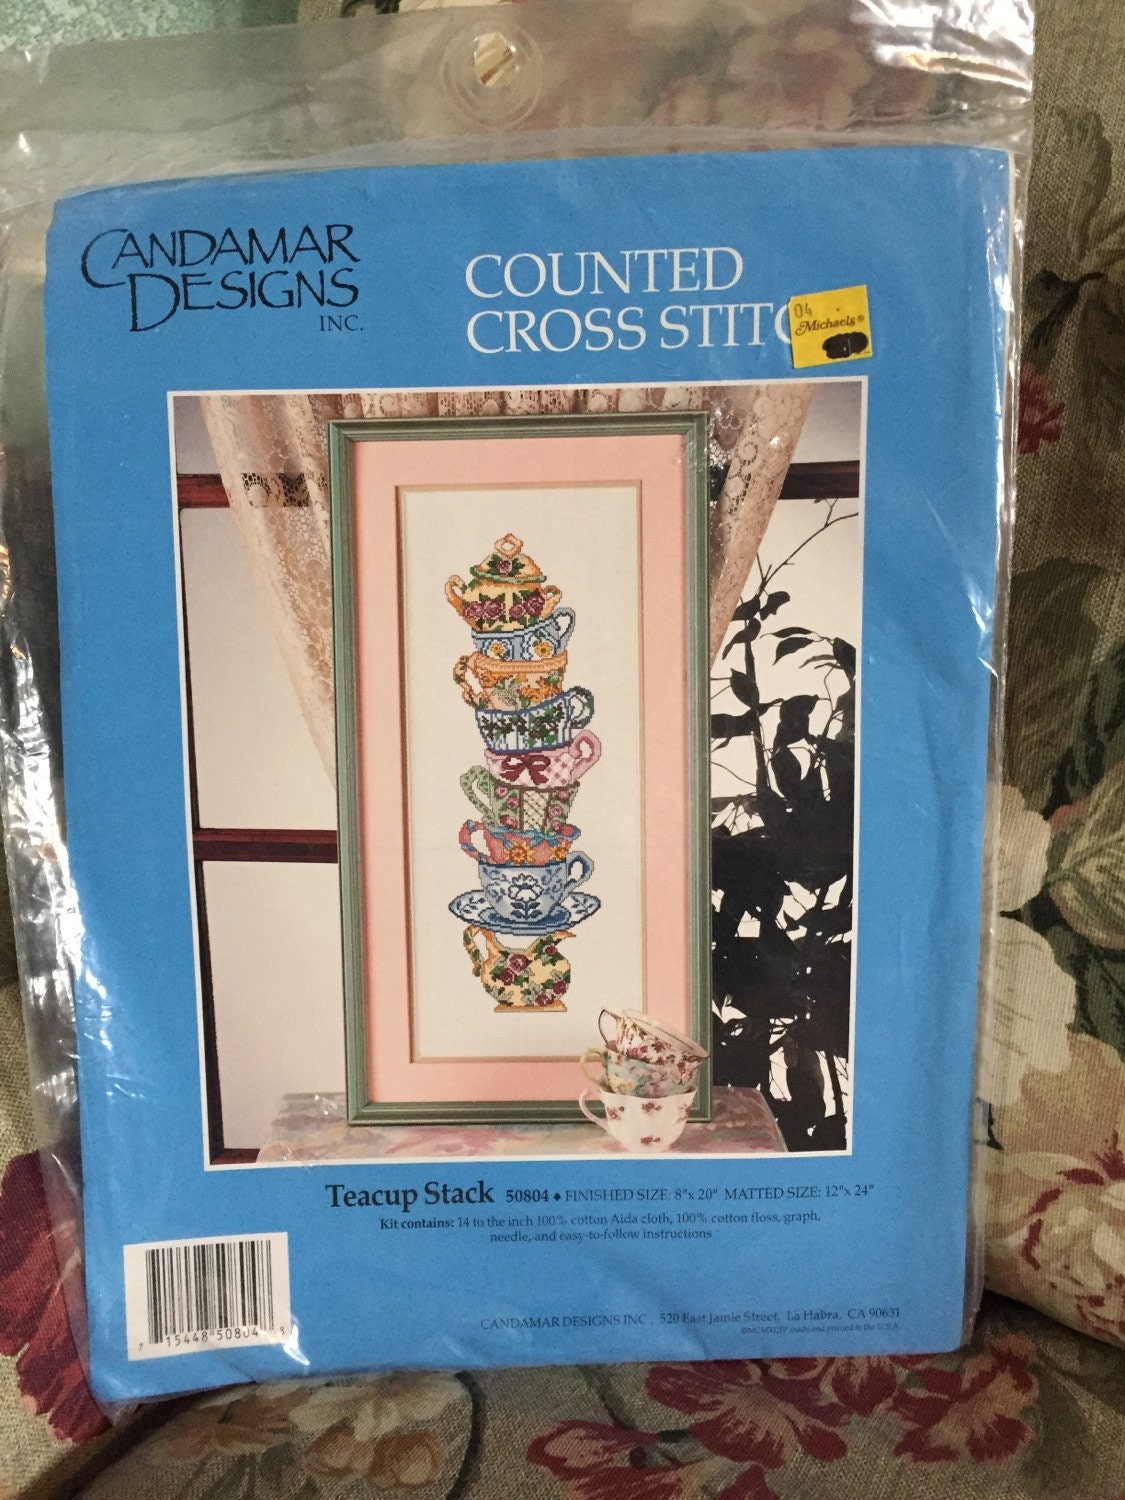 Candamar Designs Teacup Stack counted cross stitch